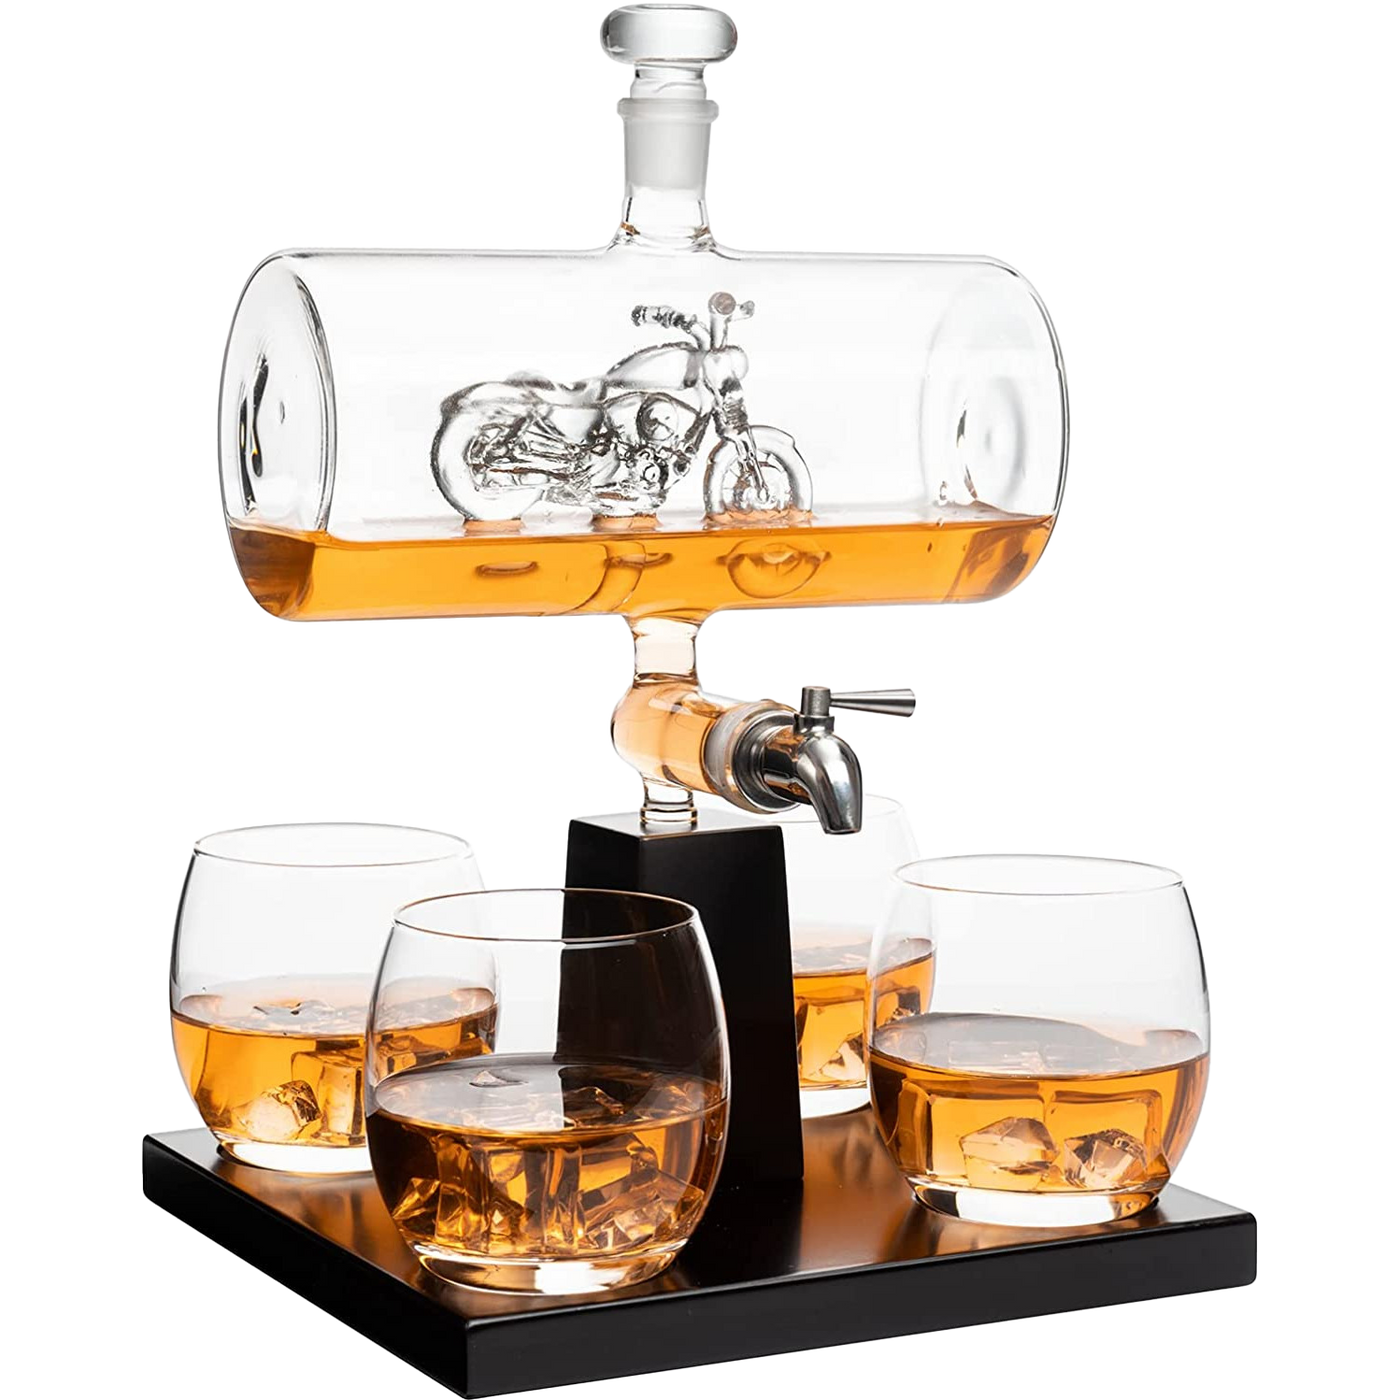 Motorcycle Decanter Whiskey & Wine Decanter Set 1100ml by Liquor Lux with 4 Whiskey Glasses, Motorcycle Gifts, Harley Davidson Motorbike Gifts, Drink Dispenser for Wine, Scotch, Bourbon 19"H 8"W